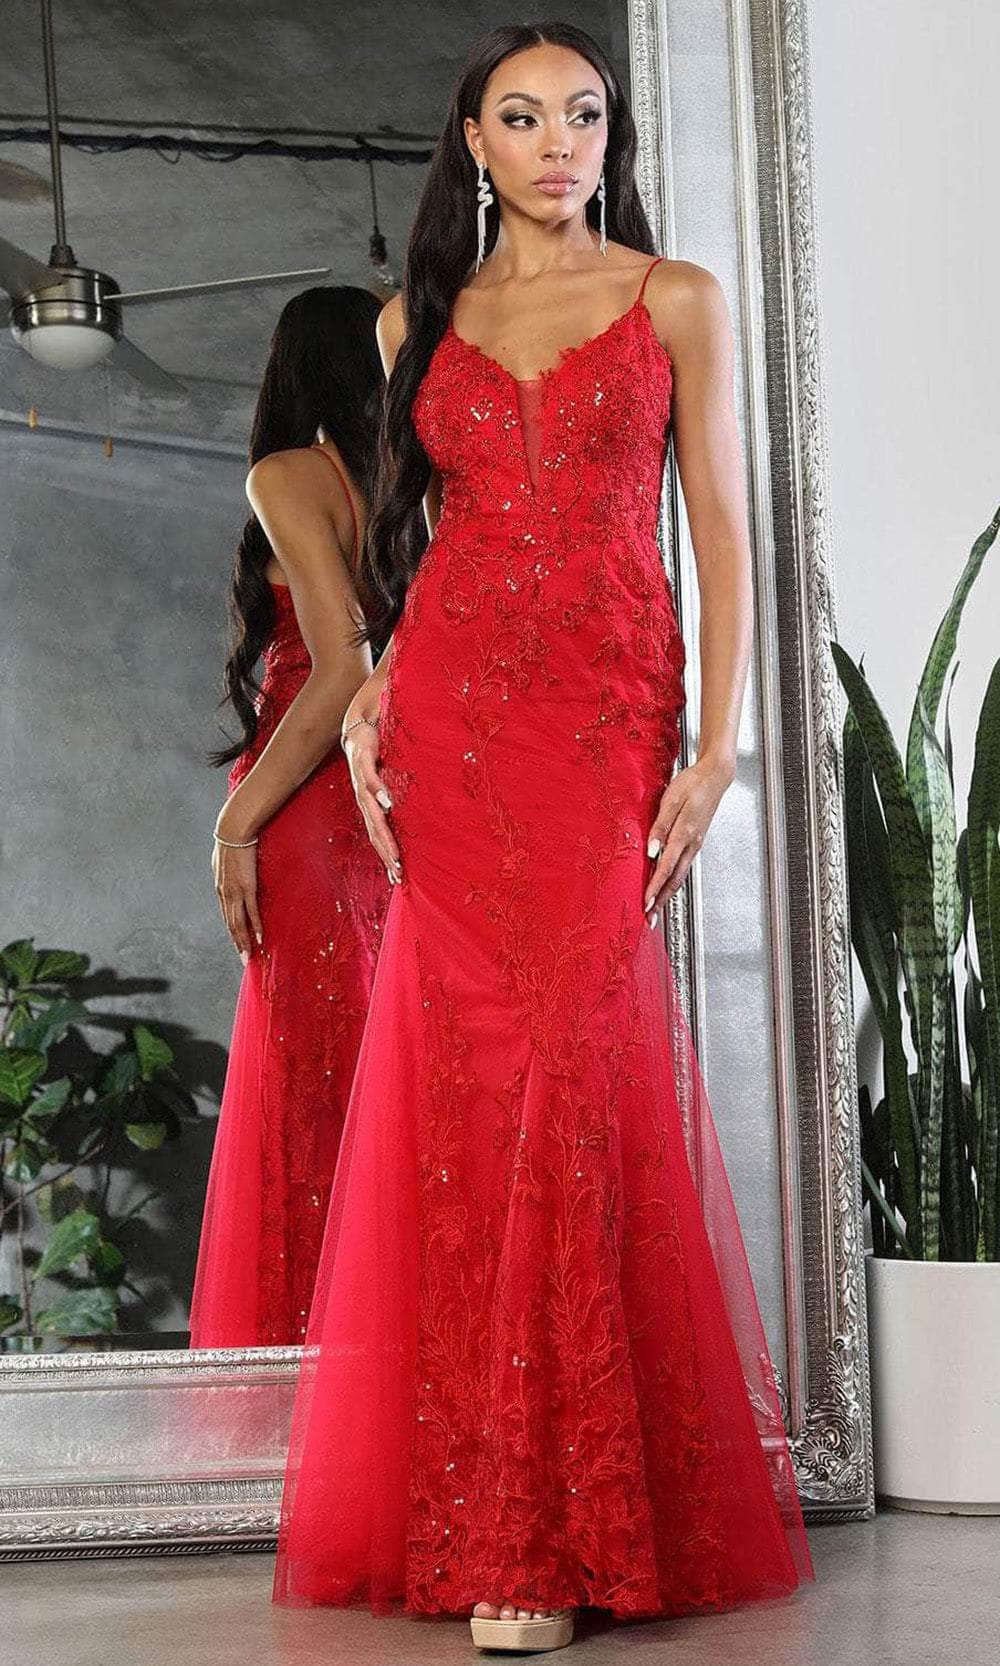 May Queen MQ2030 - Plunging Embroidered Prom Dress
